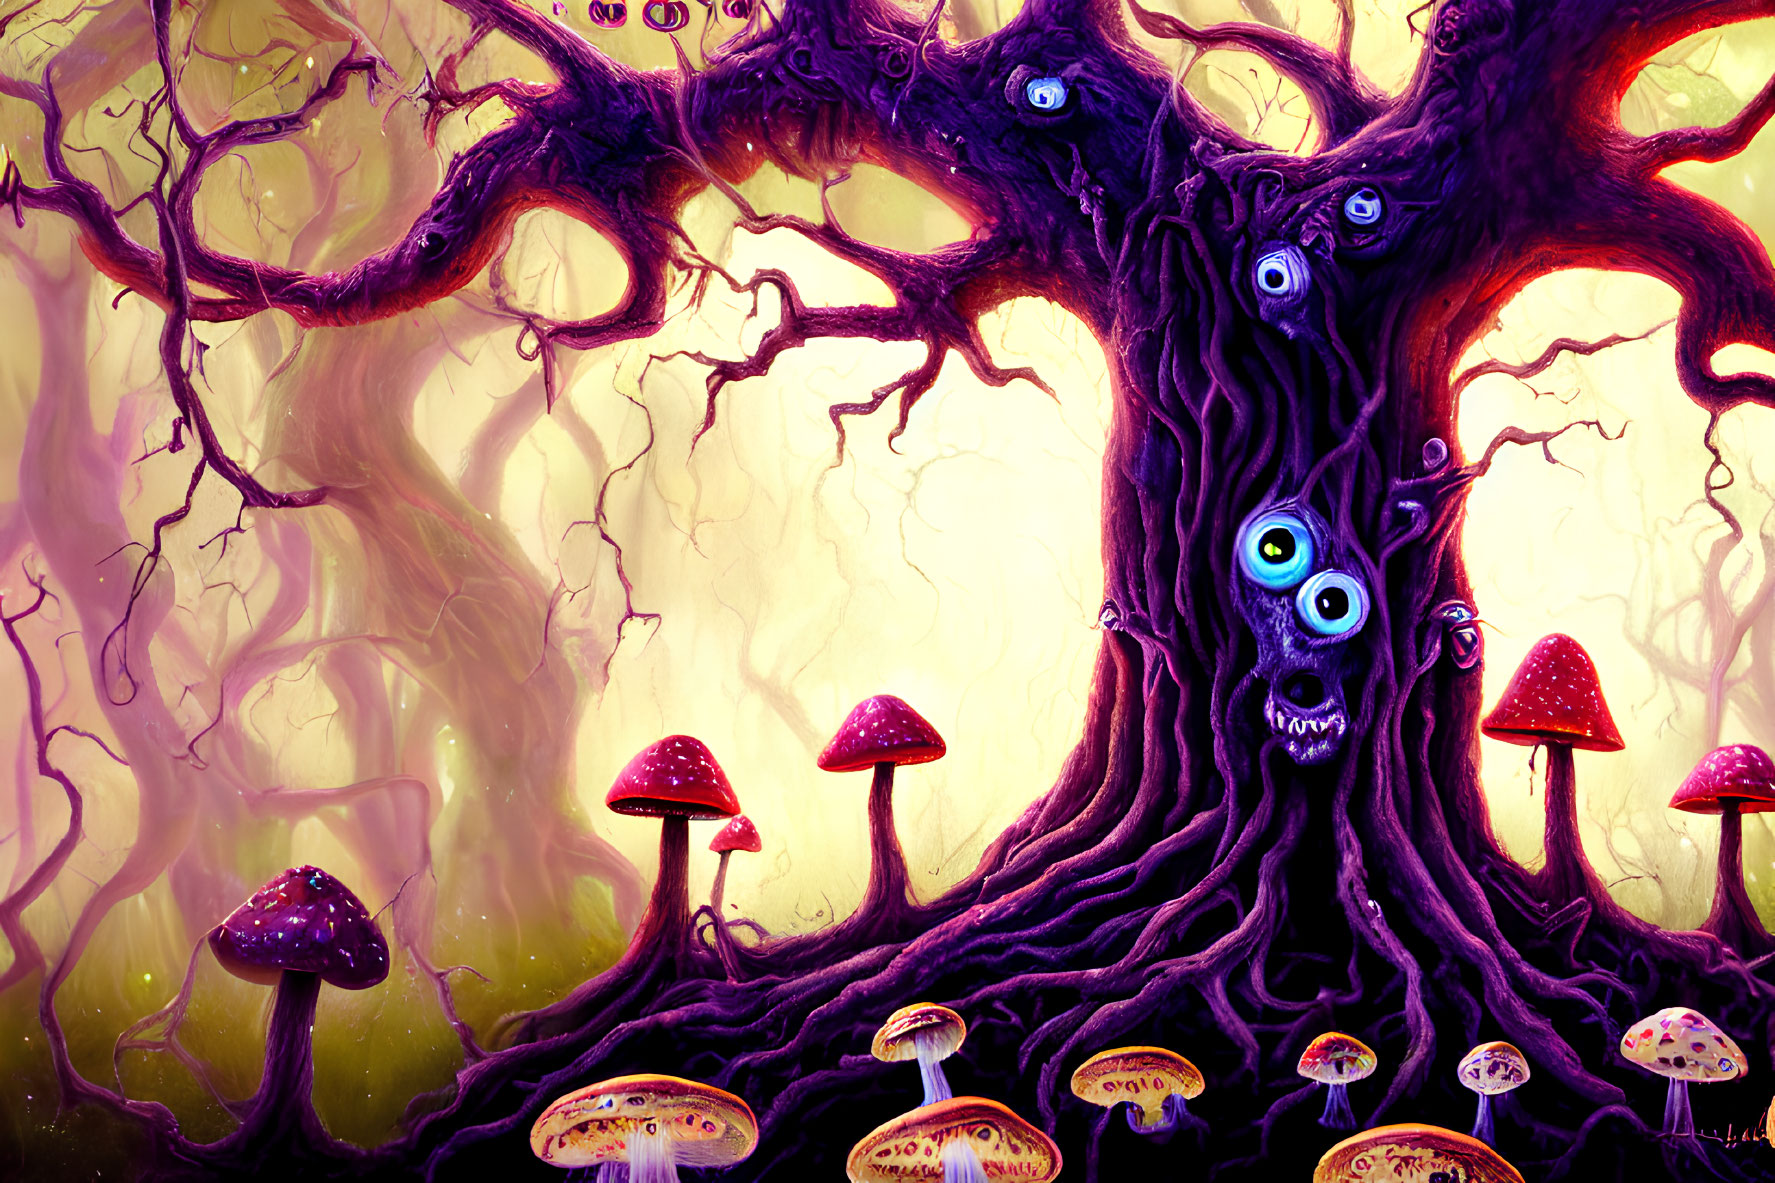 Fantastical illustration: Large tree with eyes, colorful mushrooms in enchanted forest